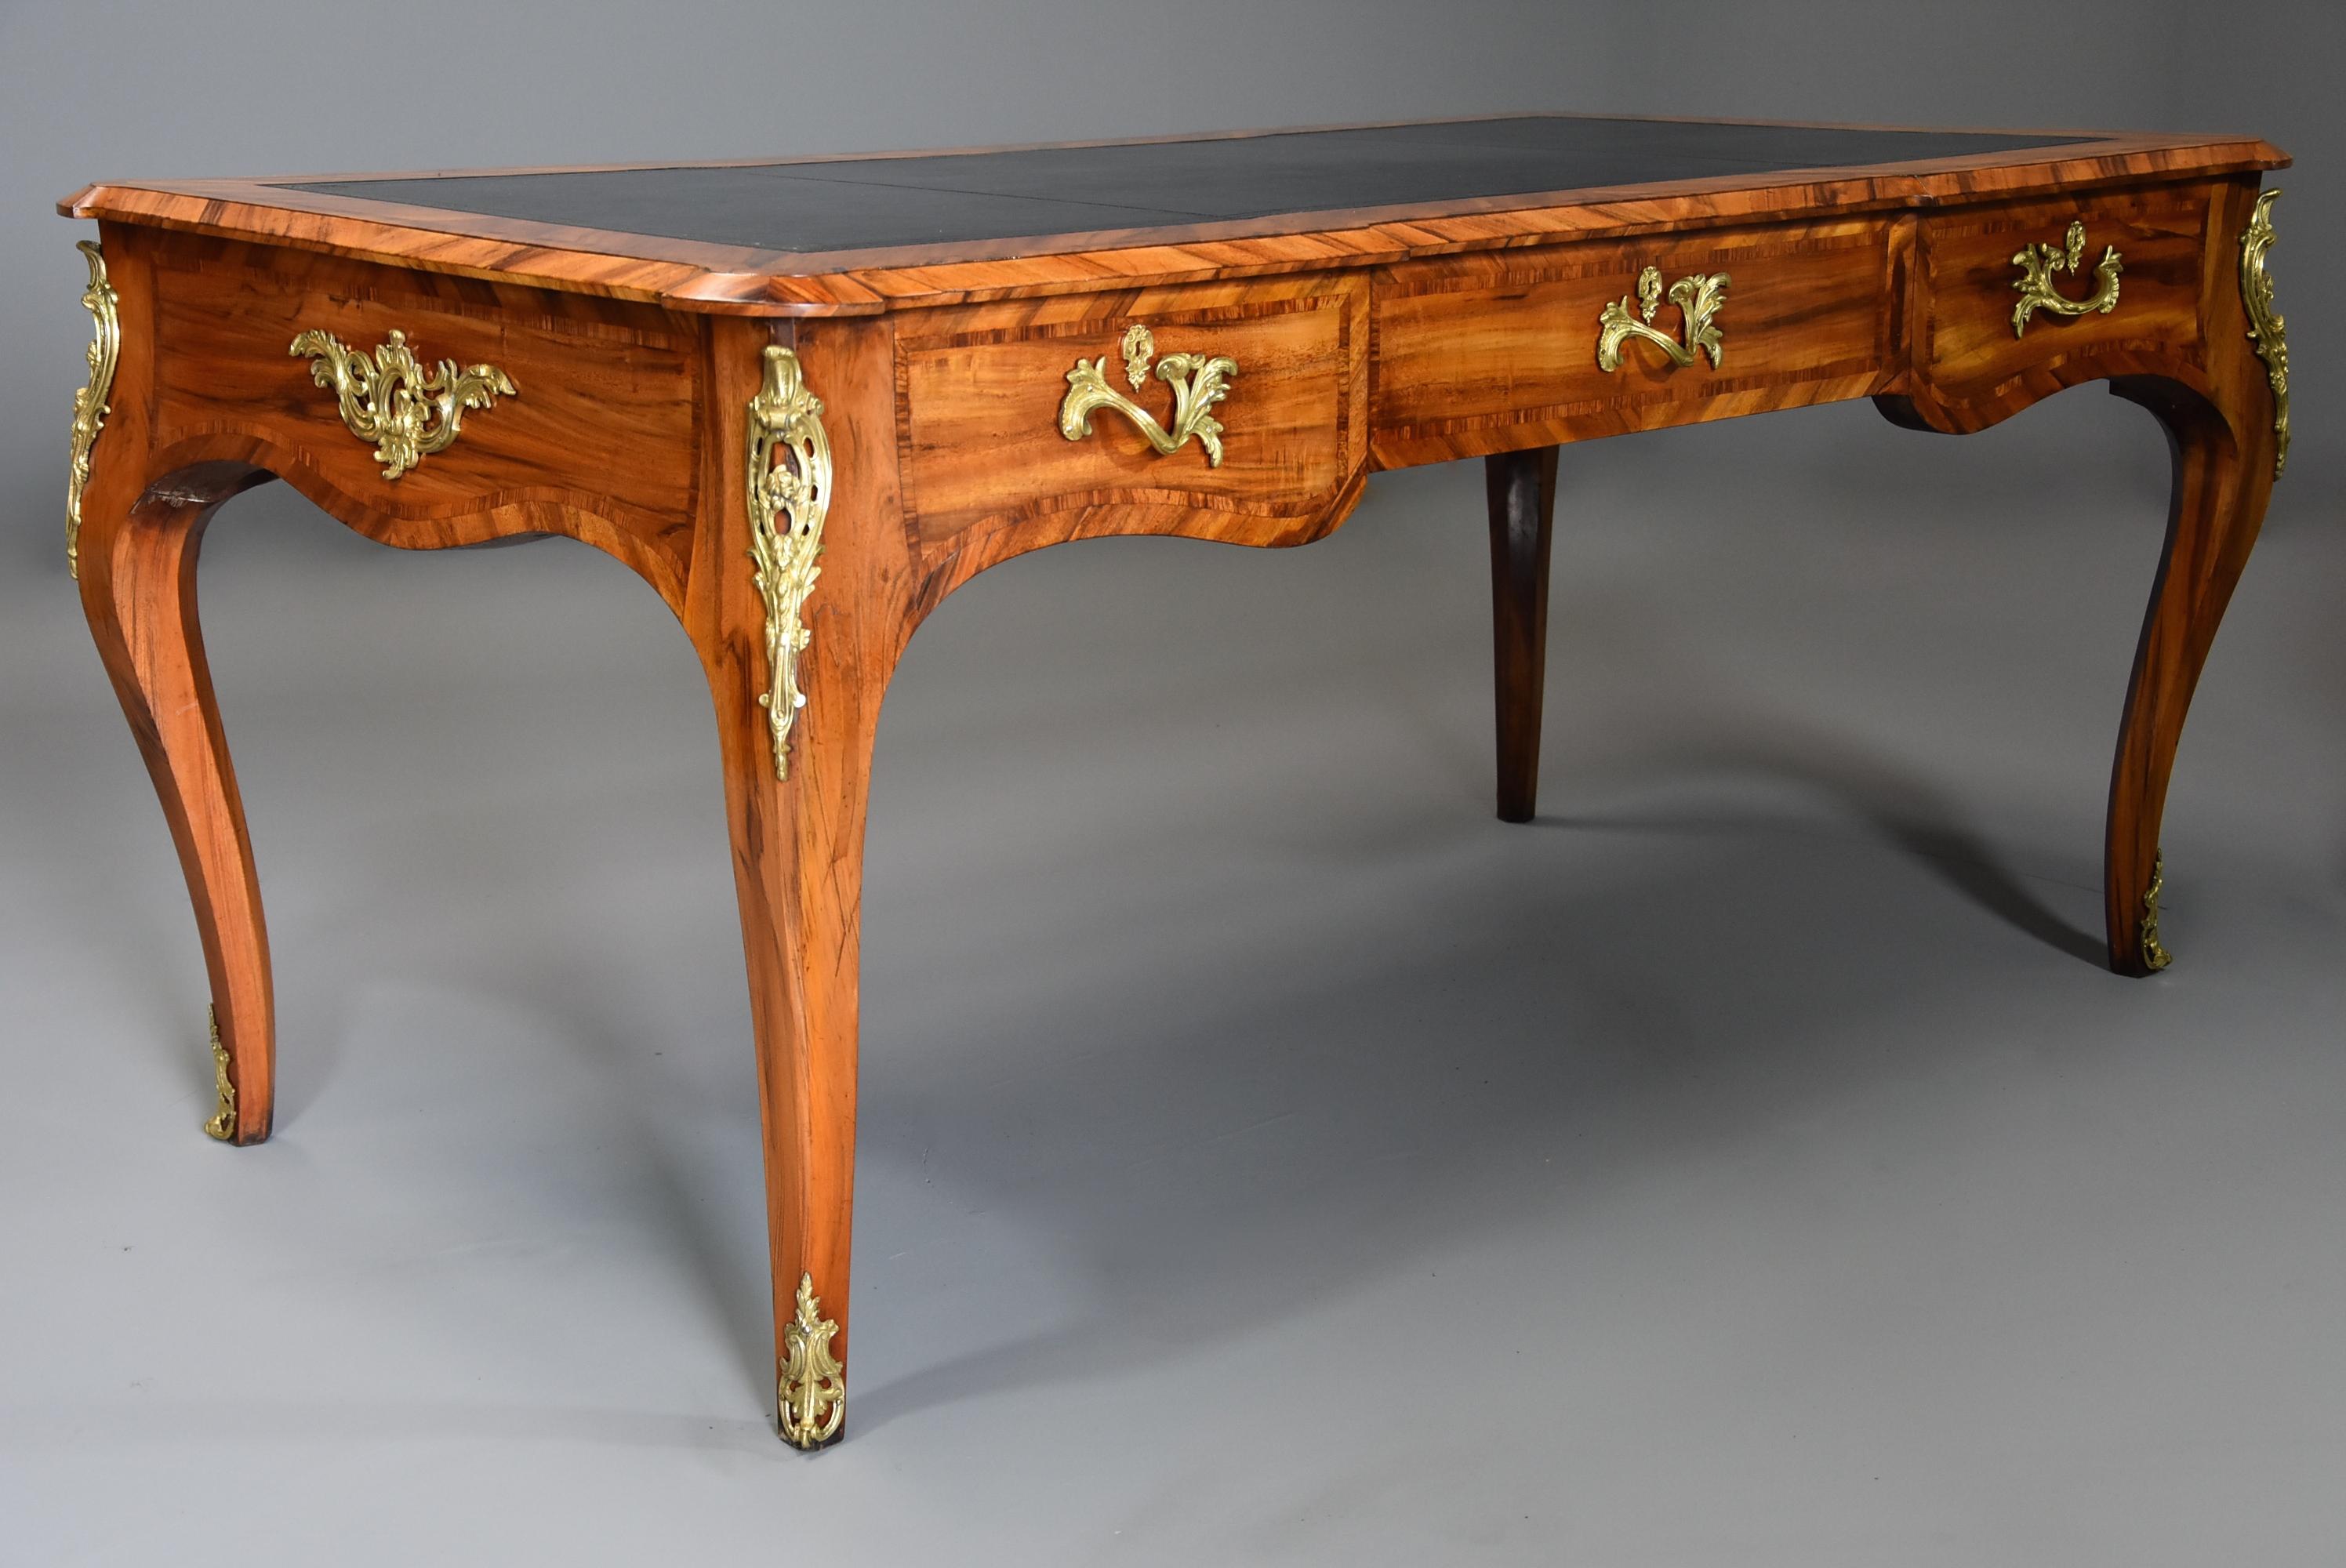 English Fine Quality Mid-19th Century Goncalo Alves Bureau Plat in the French Style For Sale